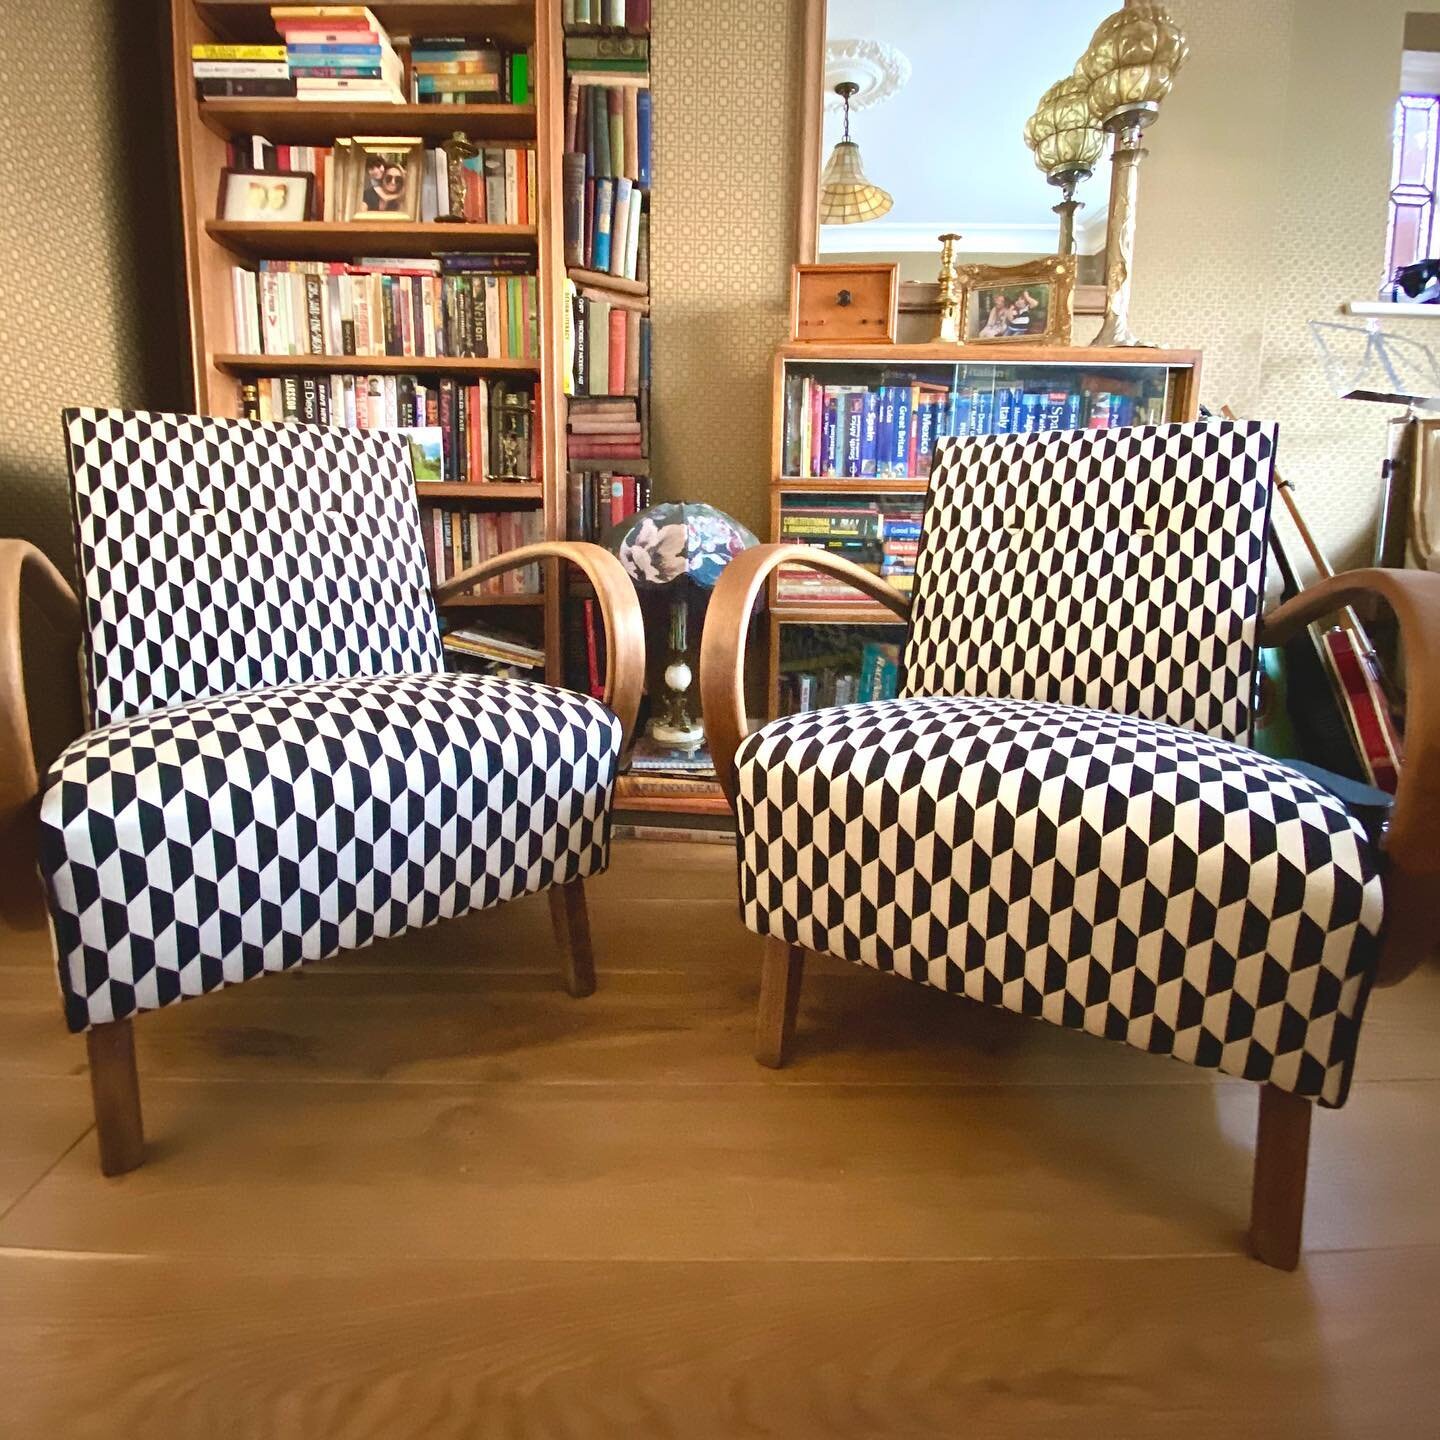 It&rsquo;s all about the curves!
How gorgeous are these original Halabala chairs? Our client loved them but a wet shopping bag left on one of them had stained the original material. We&rsquo;ve reupholstered them in Tile by Cole &amp; Son, with pipin